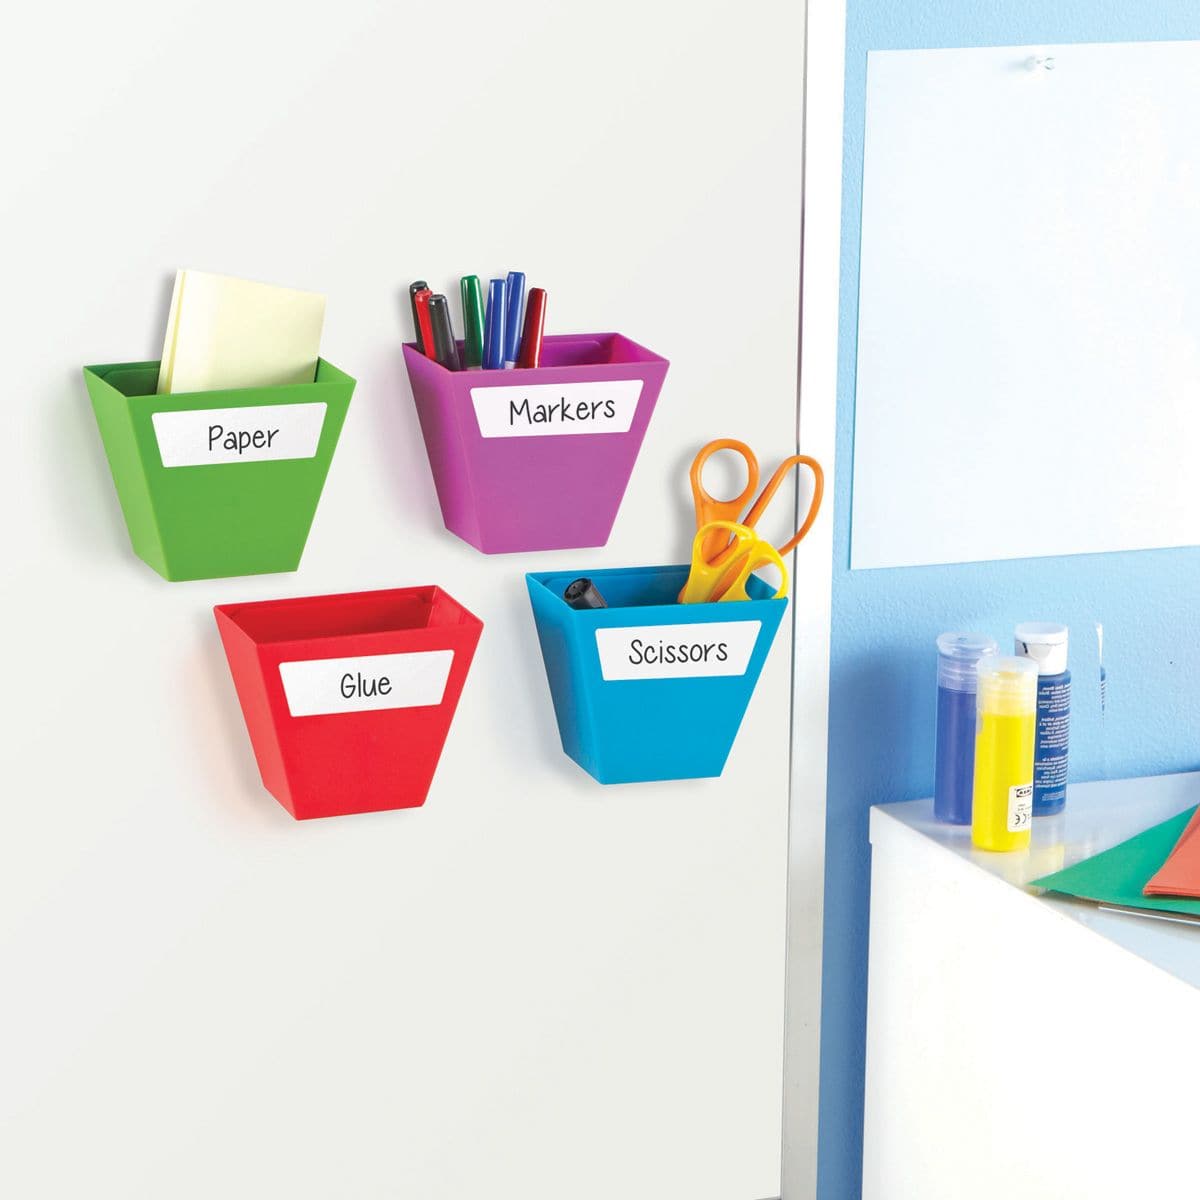 Create-a-Space Storage Bins, The Create-a-Space Storage Bins are designed to stand on their own or attach to a magnetic surface, these storage bins are great for organising your pens, pencils, art supplies and more. The Learning Resources Magnetic Create-a-Space Storage Boxes has the following benefits Vibrant and modern design Ideal storage solution for your class or home office Boxes fix to any magnetic surface or can stand independently Includes four vibrant storage boxes and a sheet of wipe-clean labels